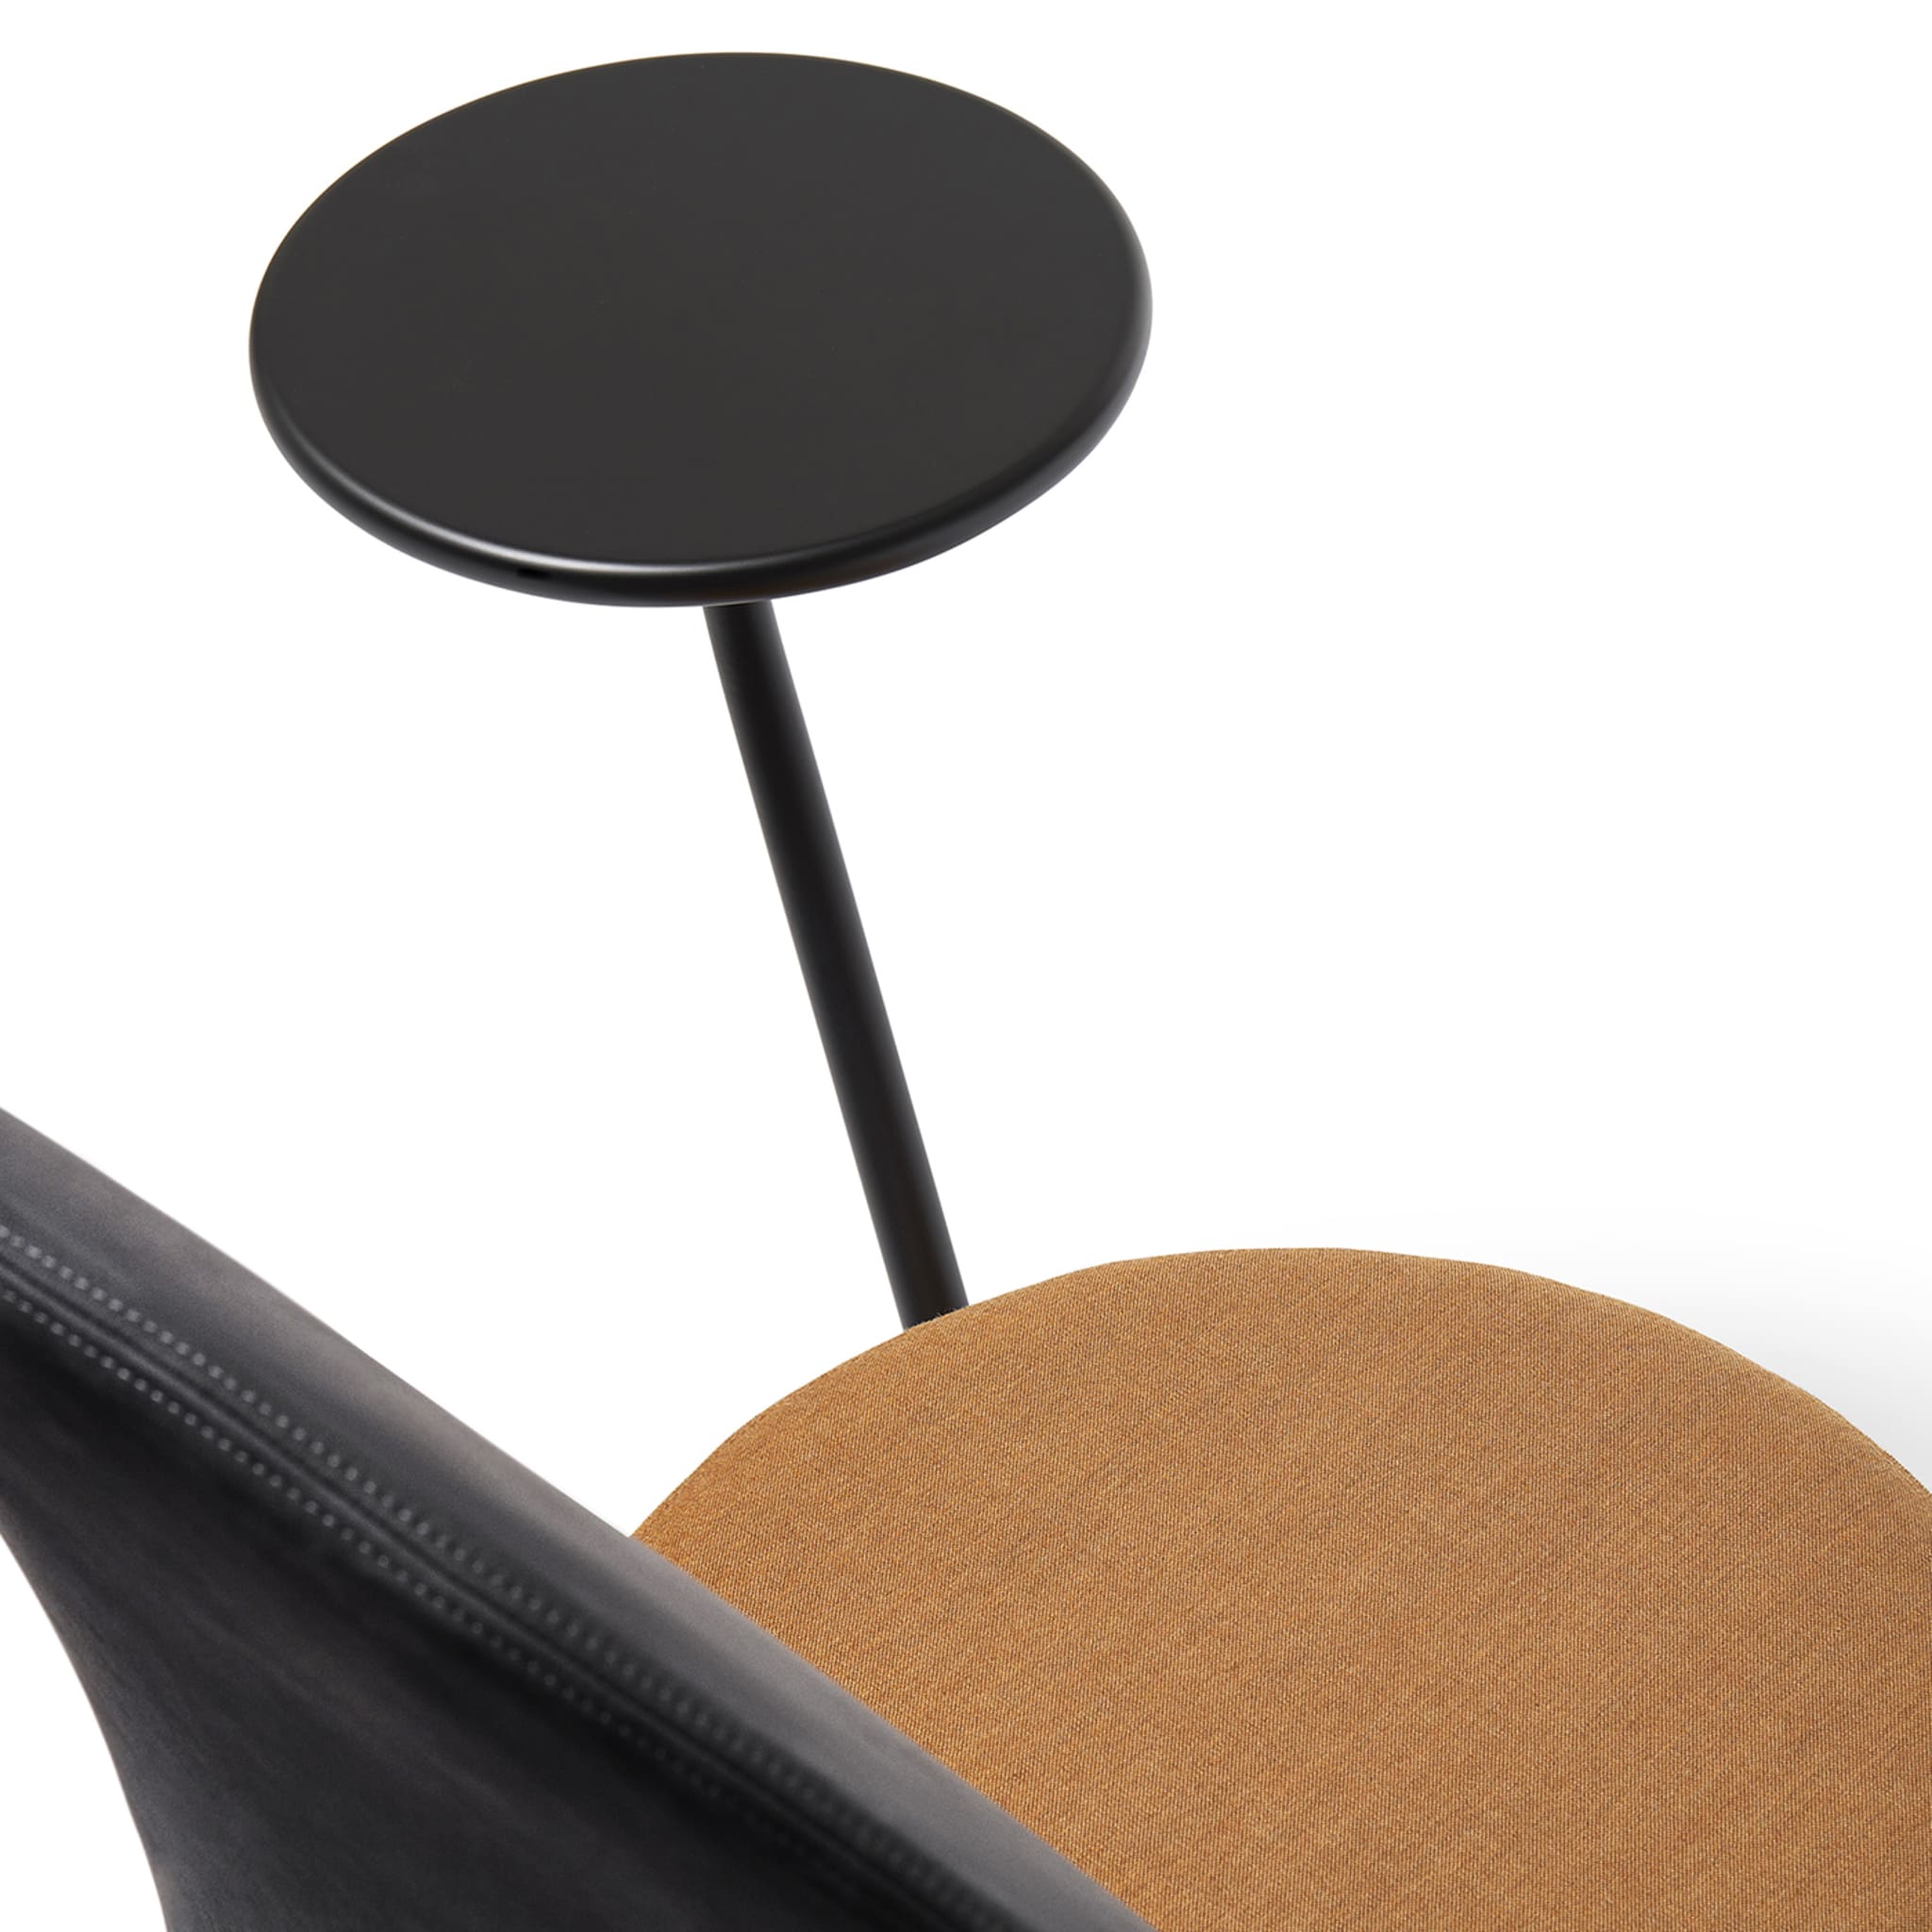 Loomi Black and Mustard Chair with Top by Lapo Ciatti - Alternative view 2